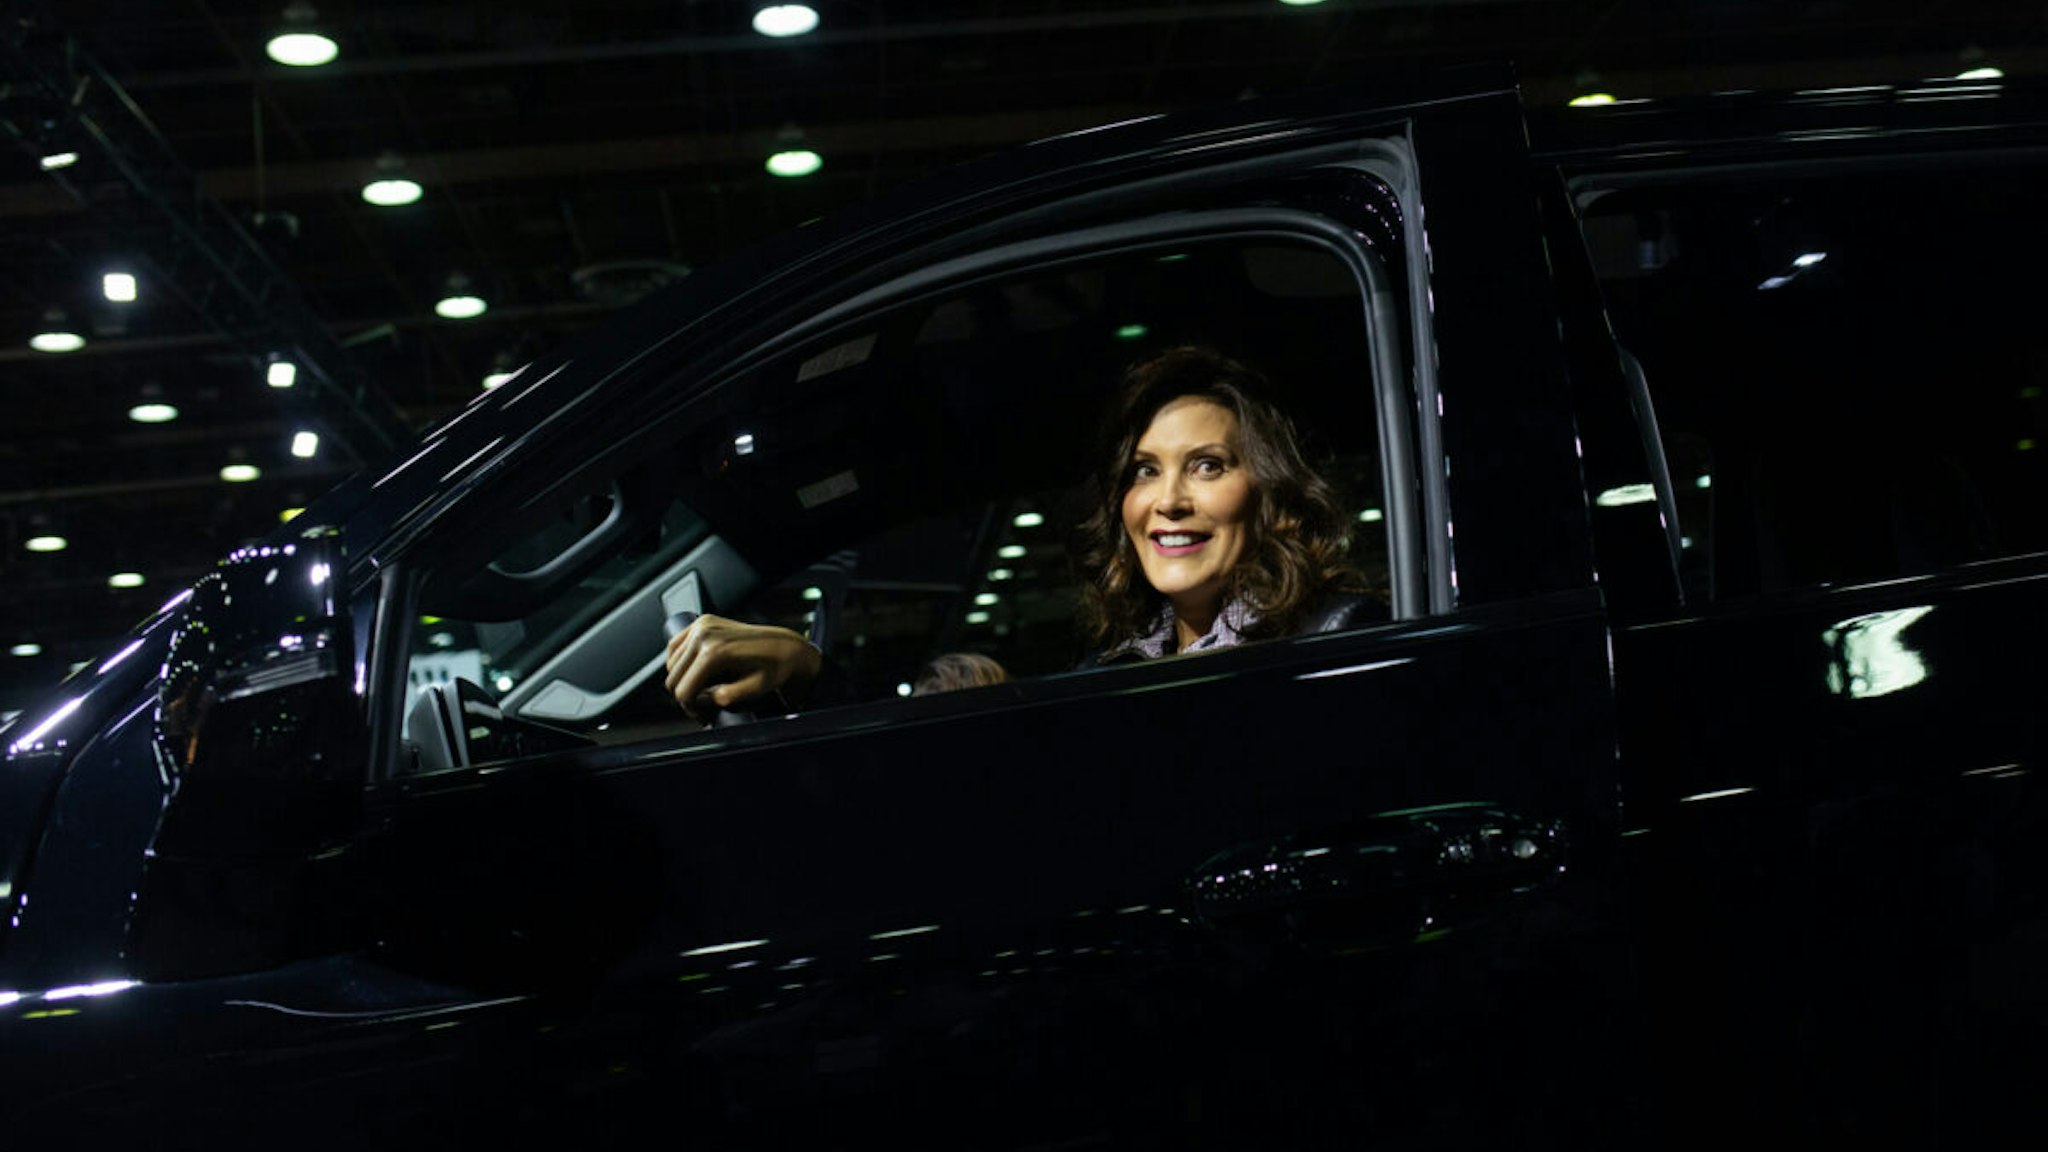 Gretchen Whitmer, governor of Michigan, sits inside a 2024 Chevrolet Silverado electric truck during the 2023 North American International Auto Show (NAIAS) in Detroit, Michigan, US, on Thursday, Sept. 14, 2023. The event showcases over 20 attractions, events, and shows about vehicles and the ever-growing technology behind them.